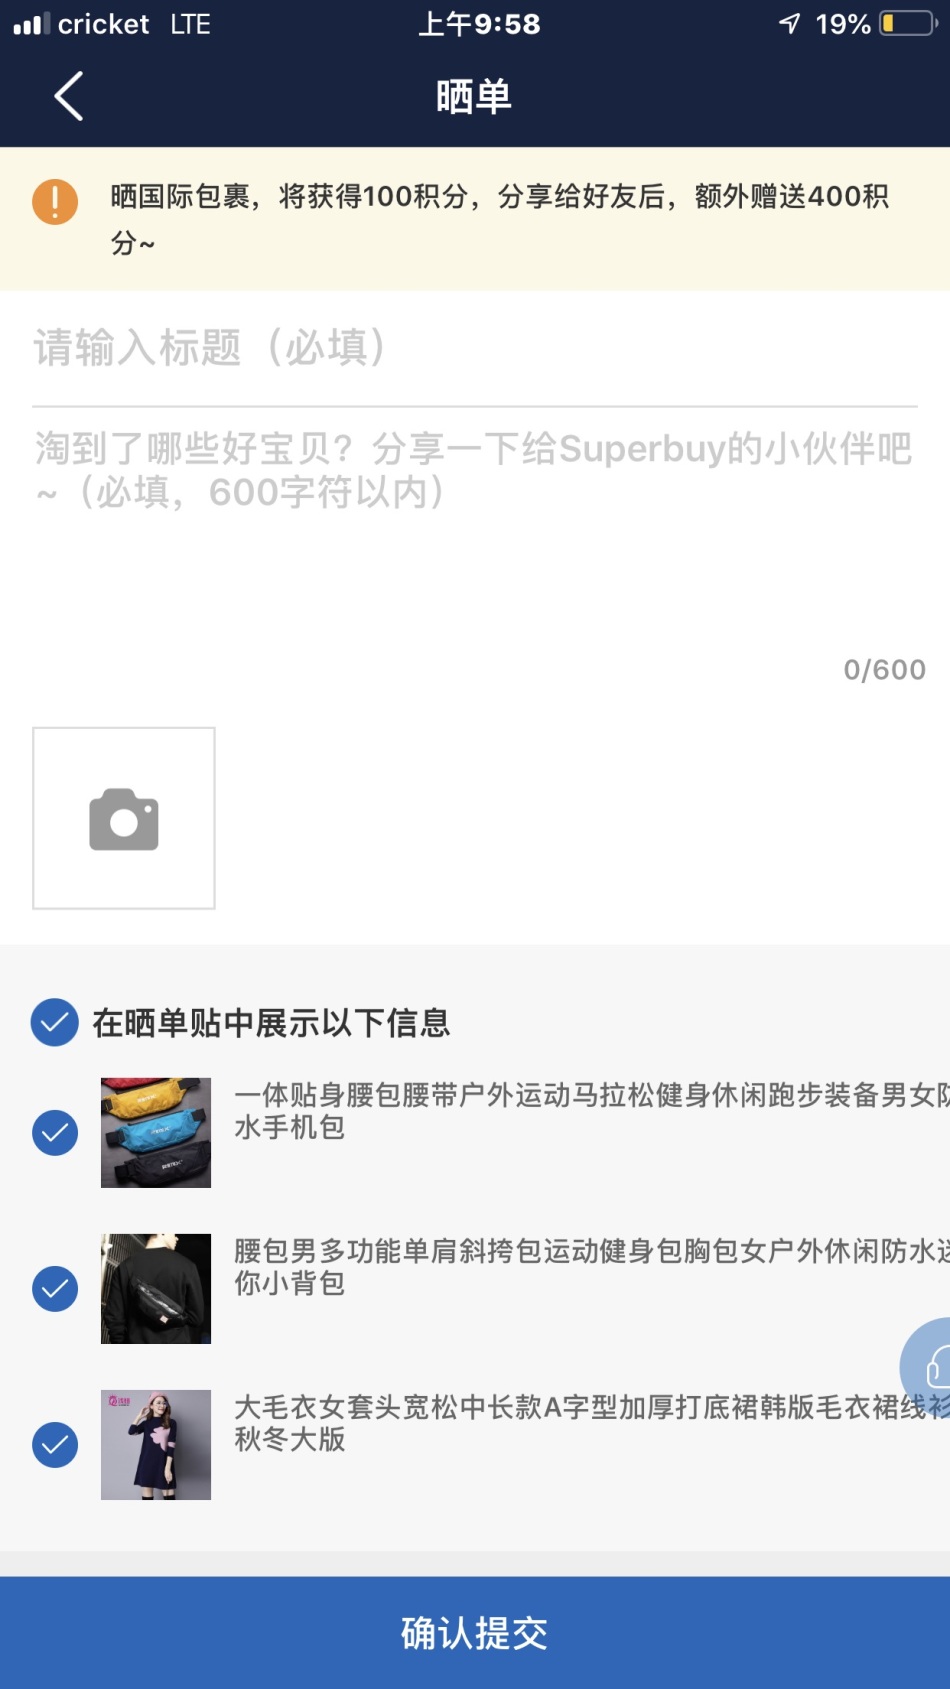 https://img1.superbuy.com/images/consult/2018/11/28/464a83054805be1b8ce8abce8f13adbd.jpg?x-oss-process=image/resize,w_950